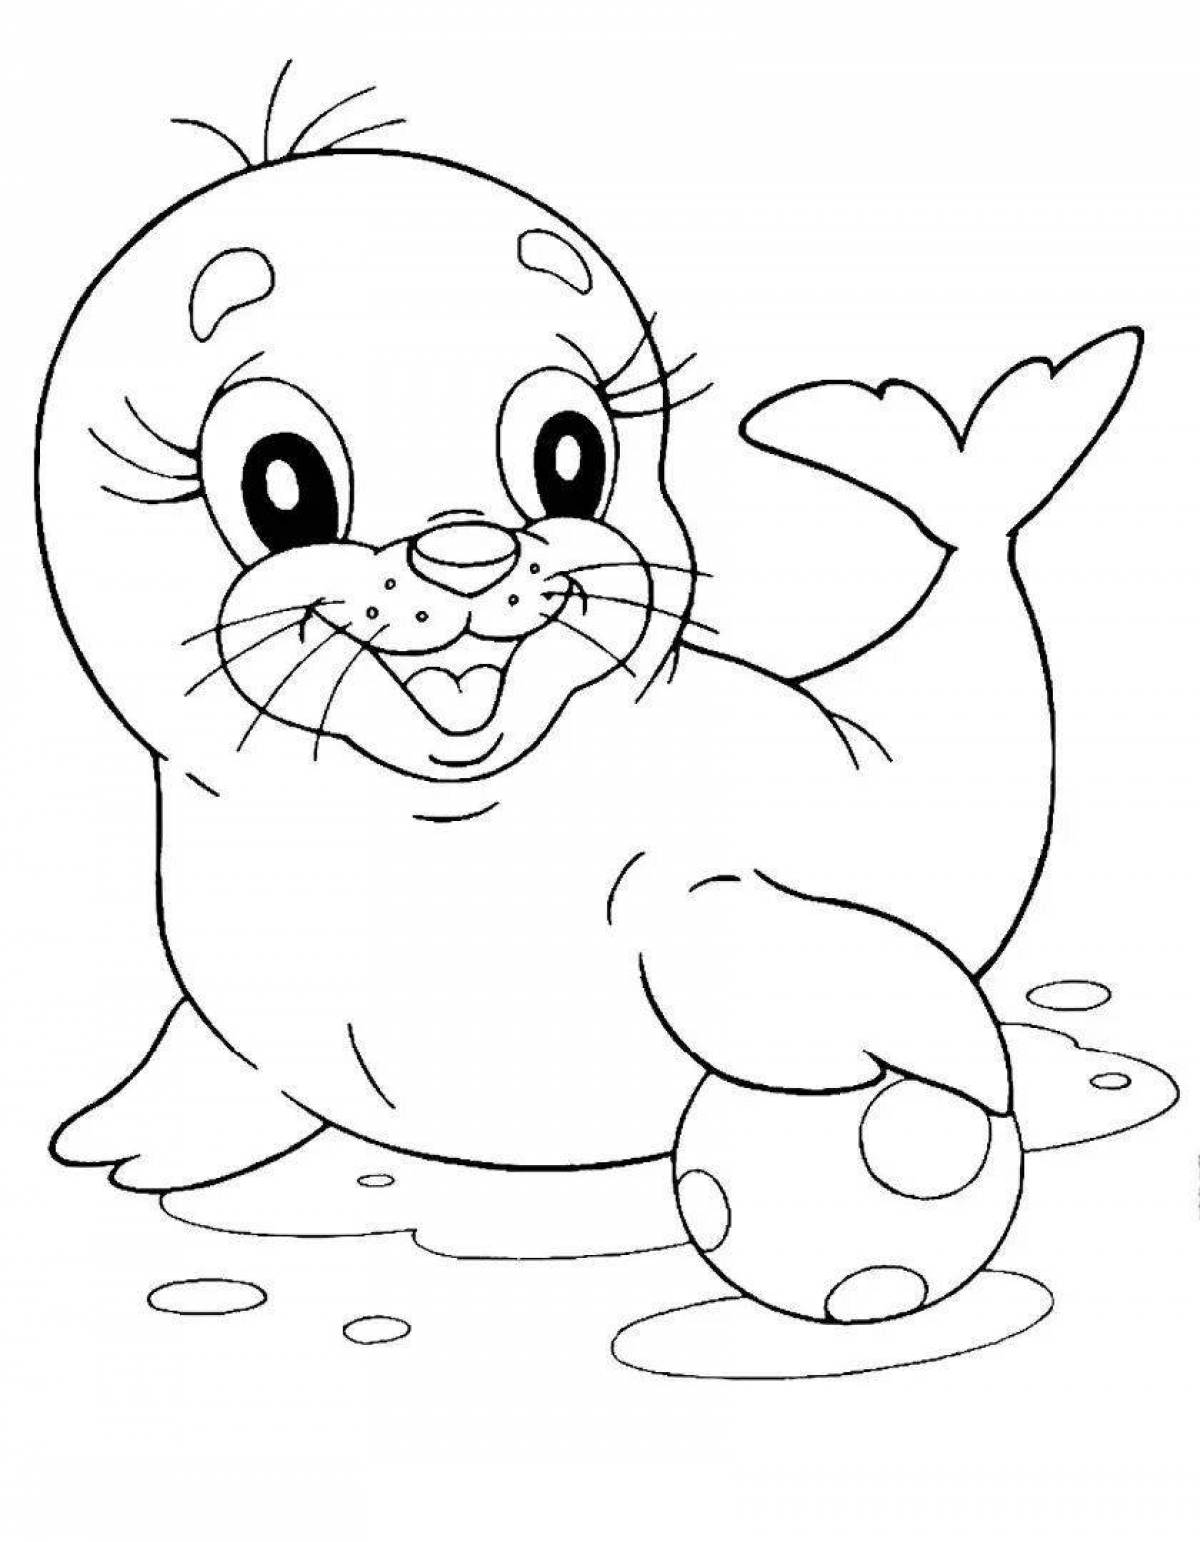 Sweet animal coloring pages for kids